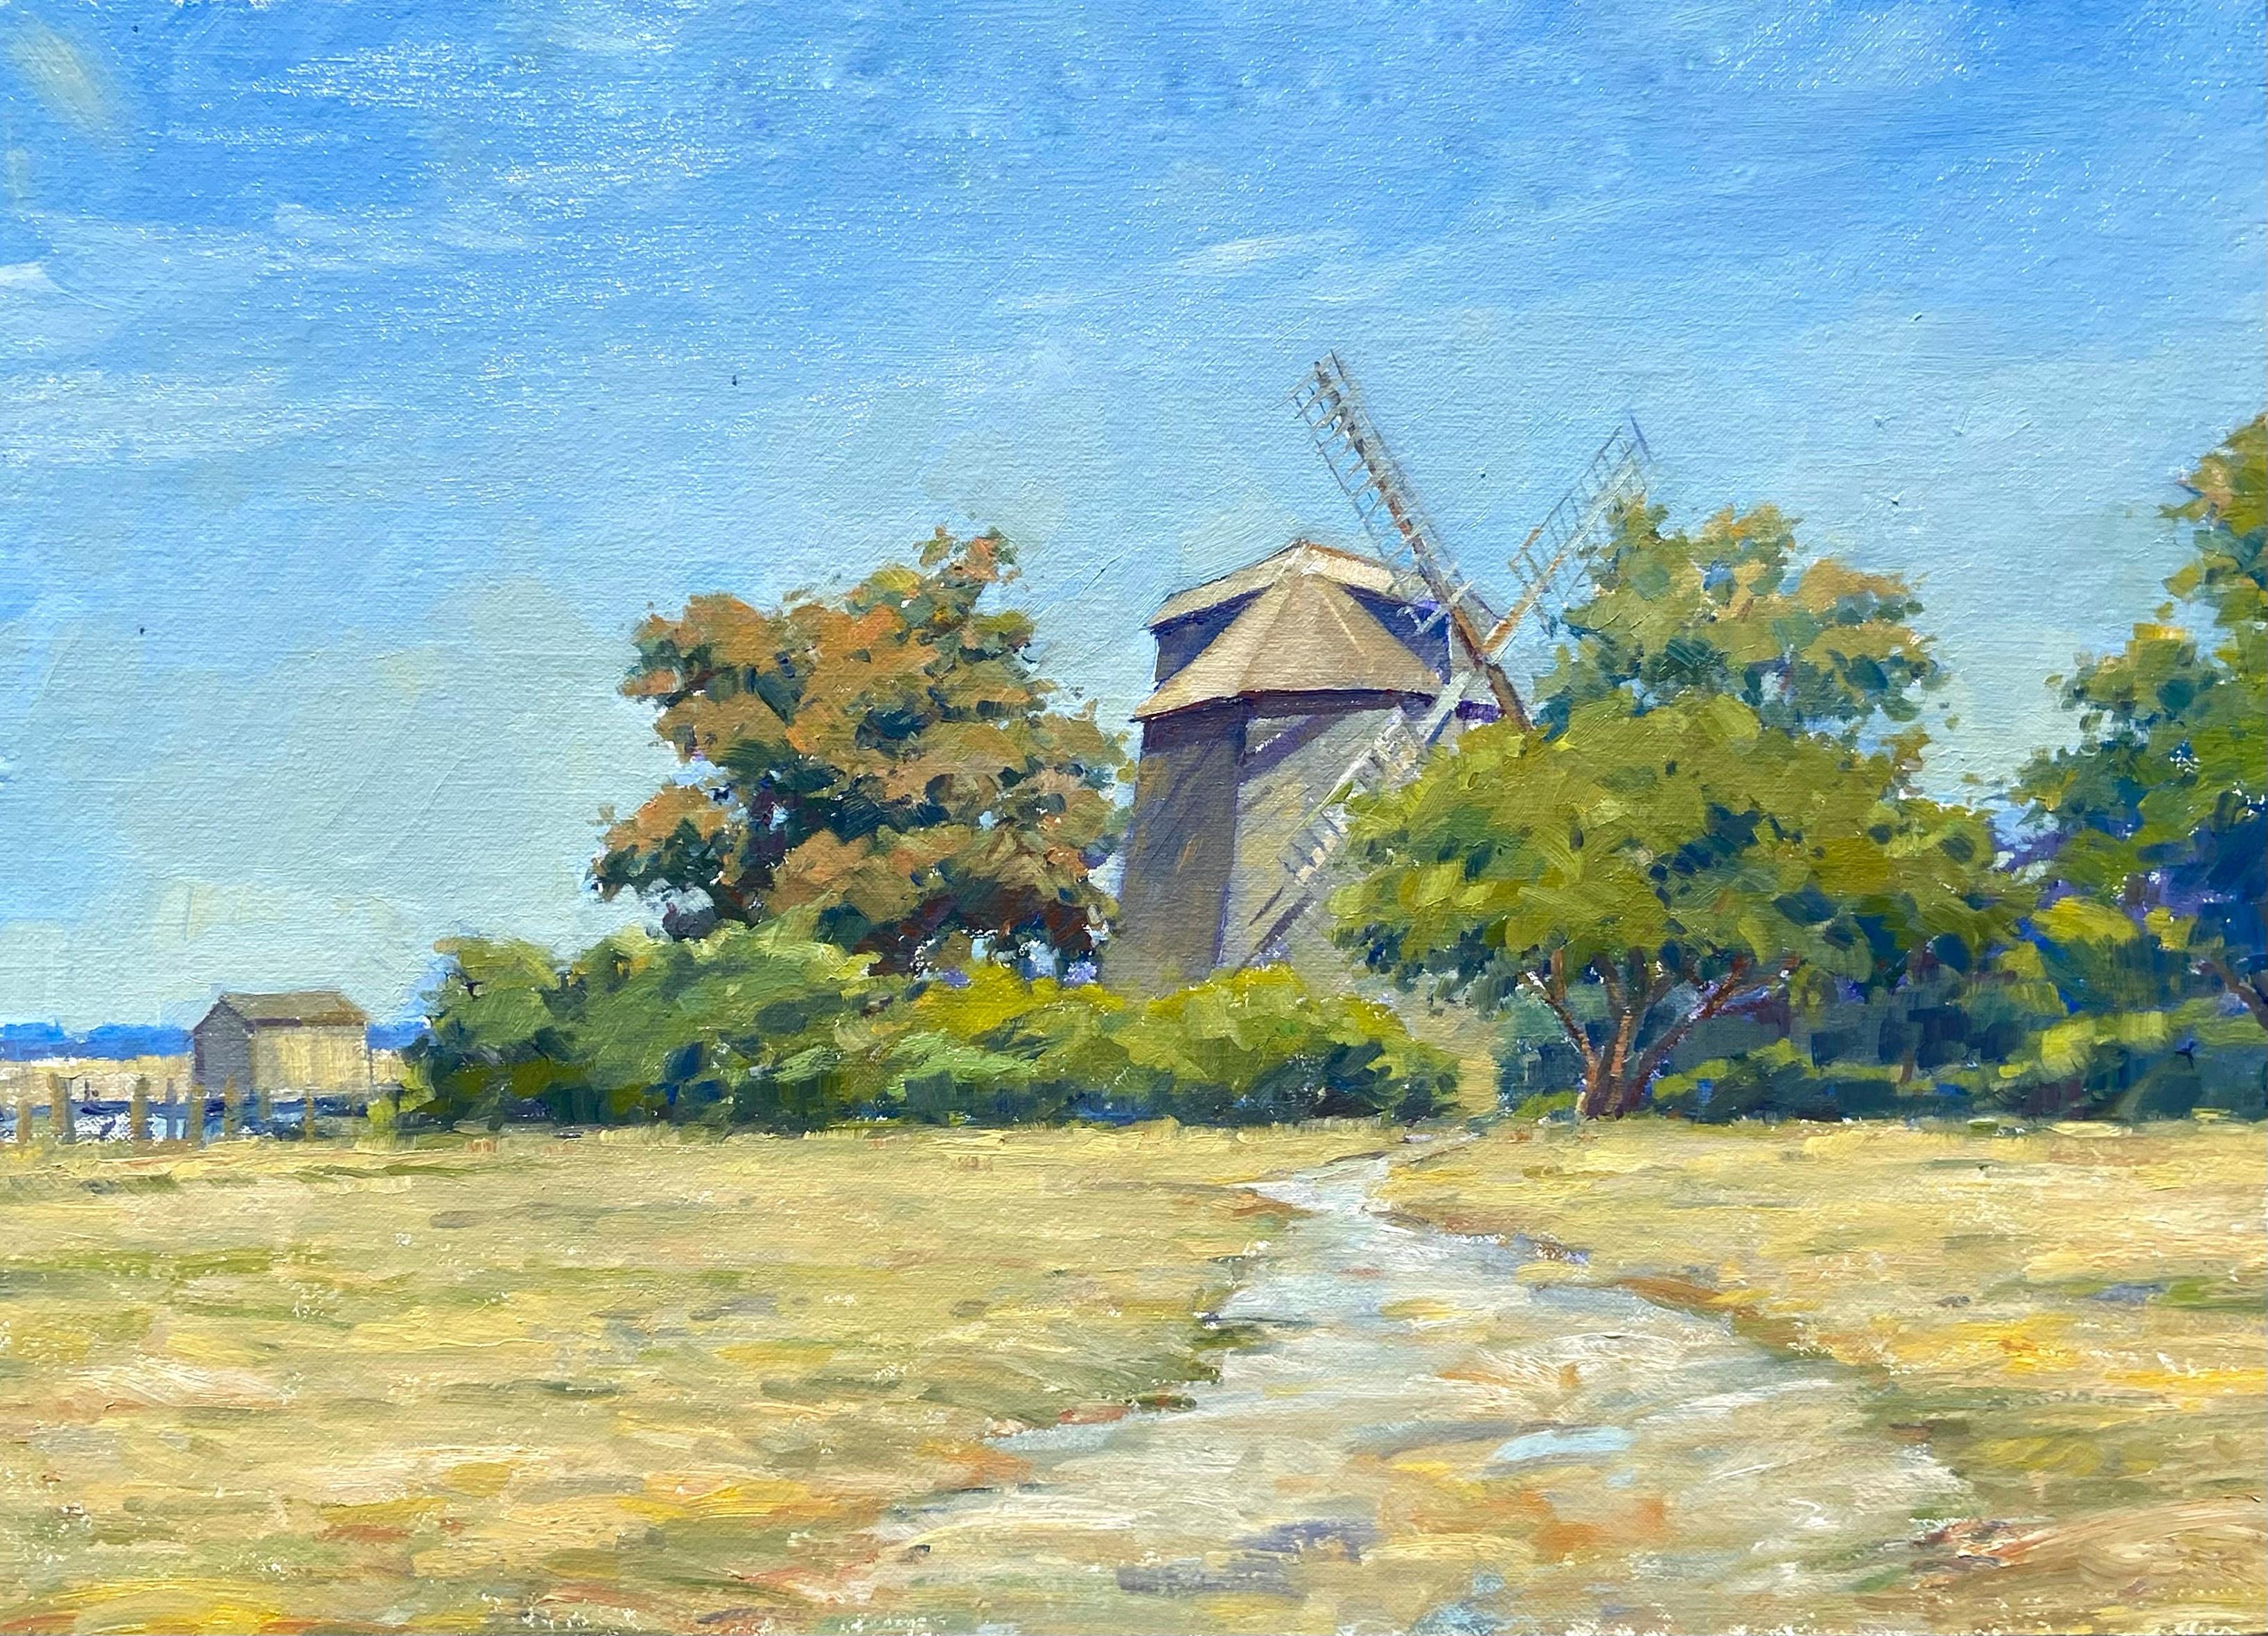 Tina Orsolic Dalessio Still-Life Painting - "Sag Harbor Windmill" - contemporary oil painting of historic Hamptons windmill